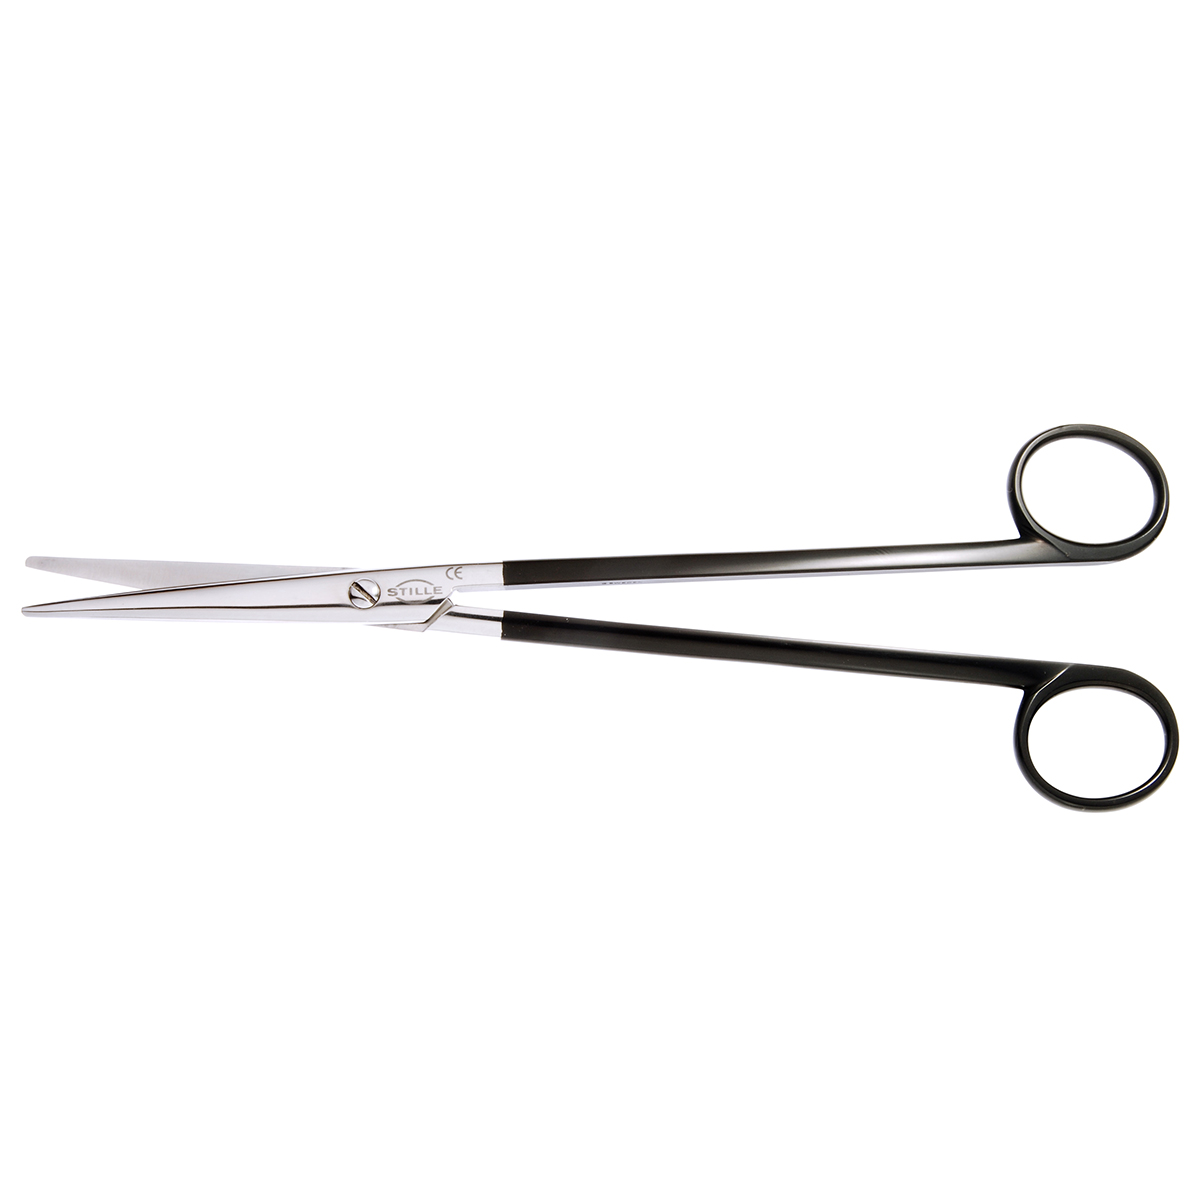 Cuticle Scissors with Curved and Thin Blades Made in Italy